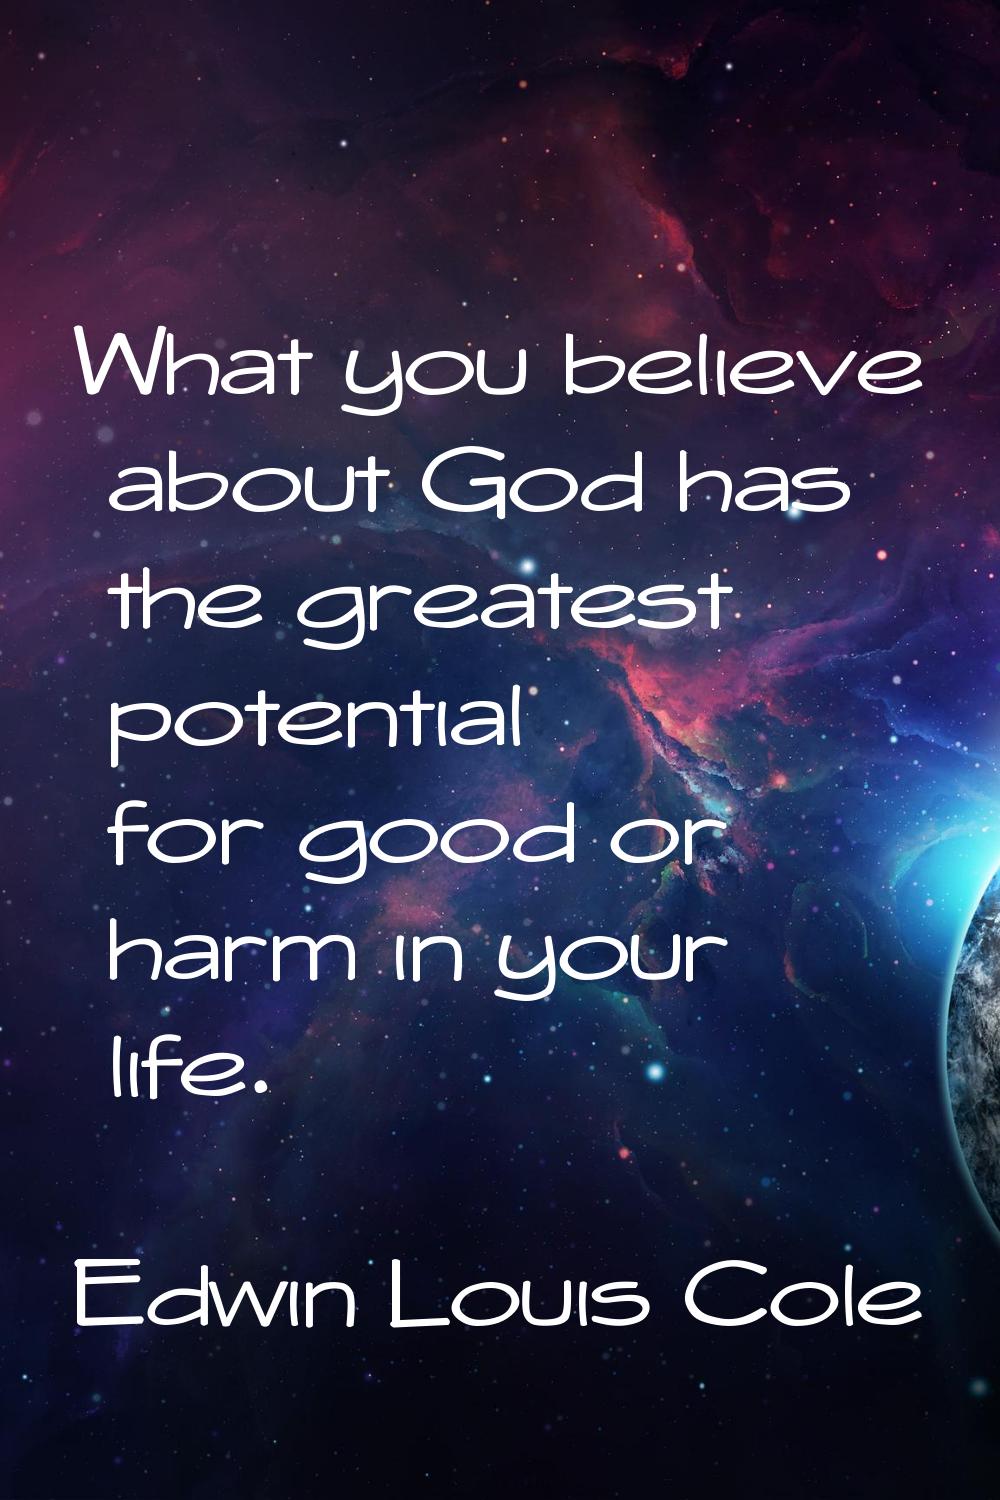 What you believe about God has the greatest potential for good or harm in your life.